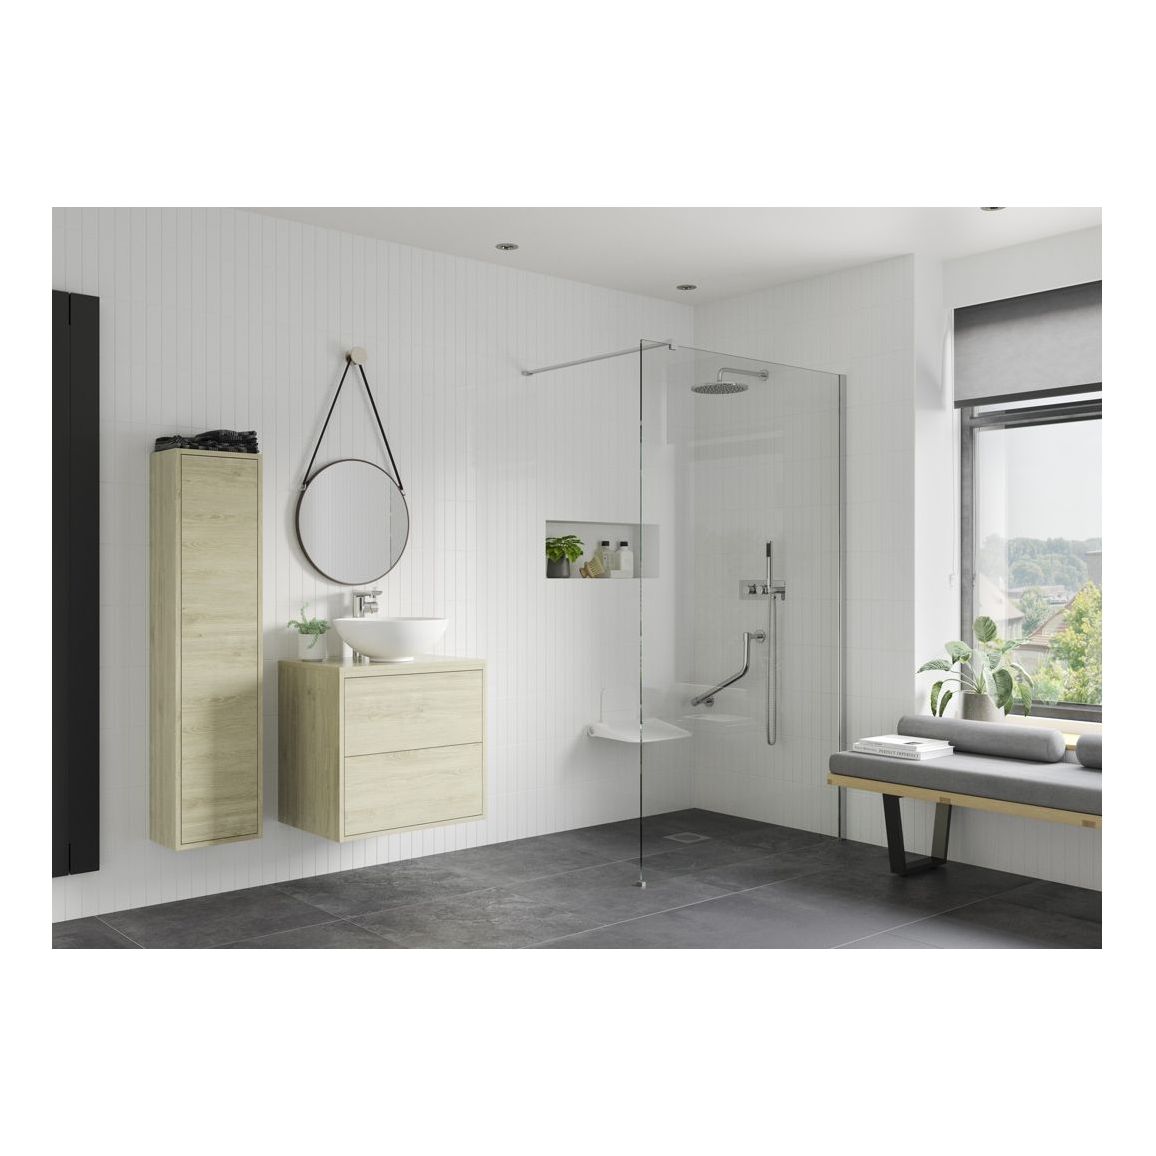 Montague 1400mm Wetroom Panel & Floor-to-Ceiling Pole - Chrome